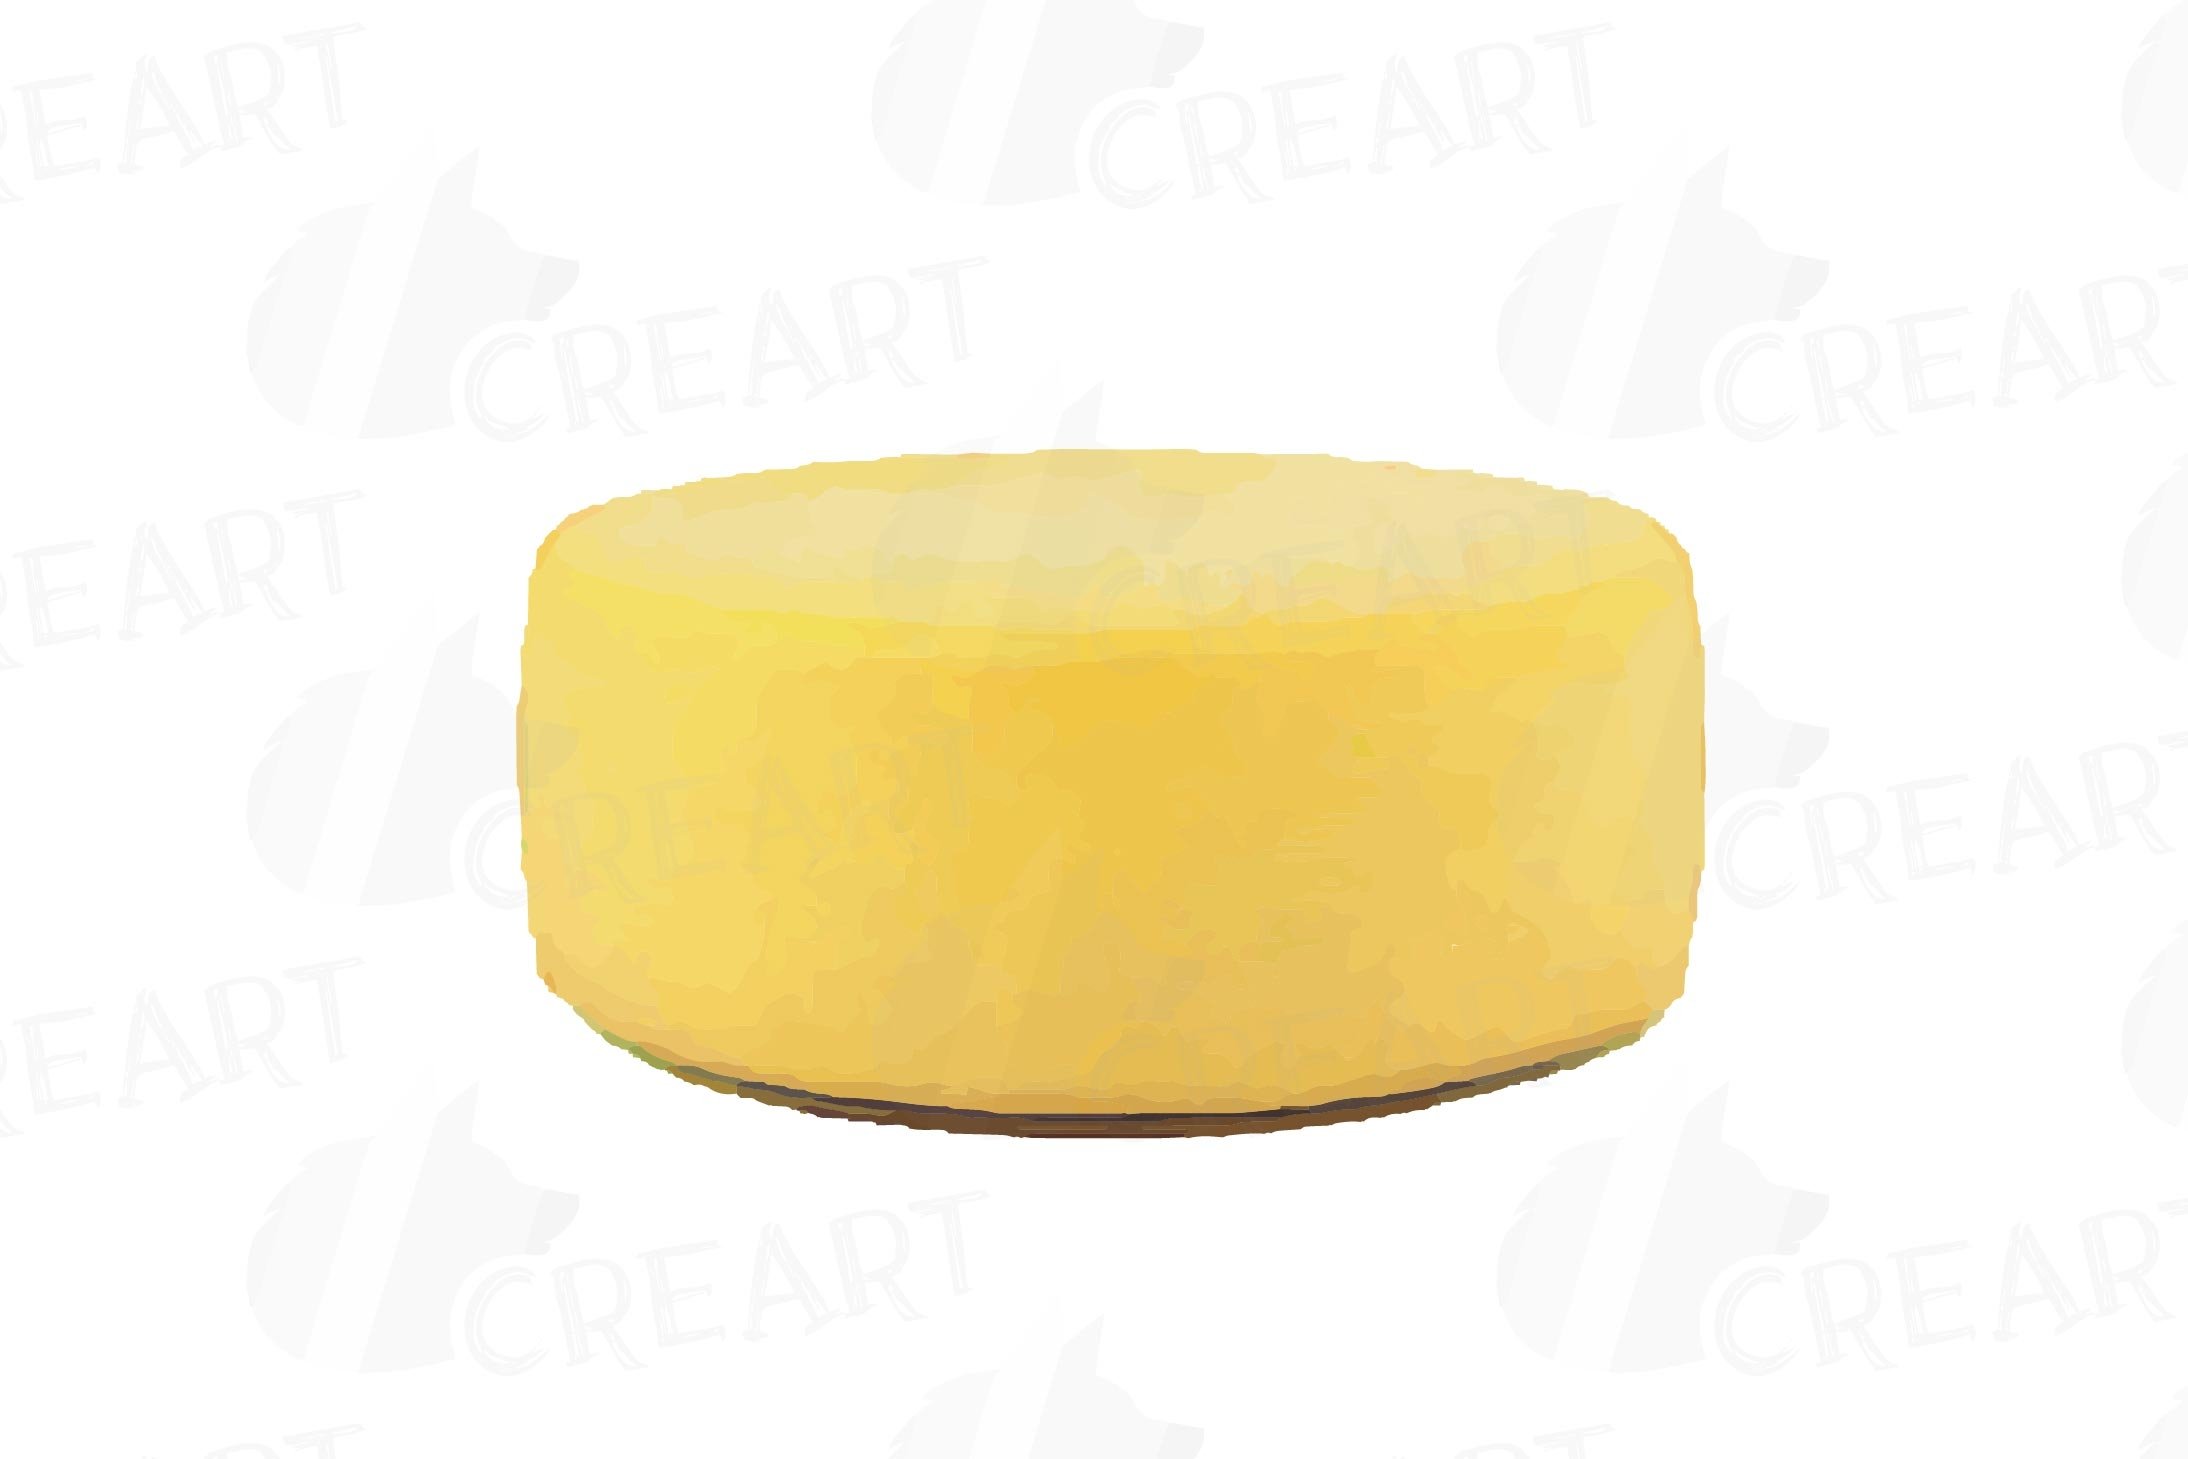 Watercolor image of hard cheese cheeses on a white background.